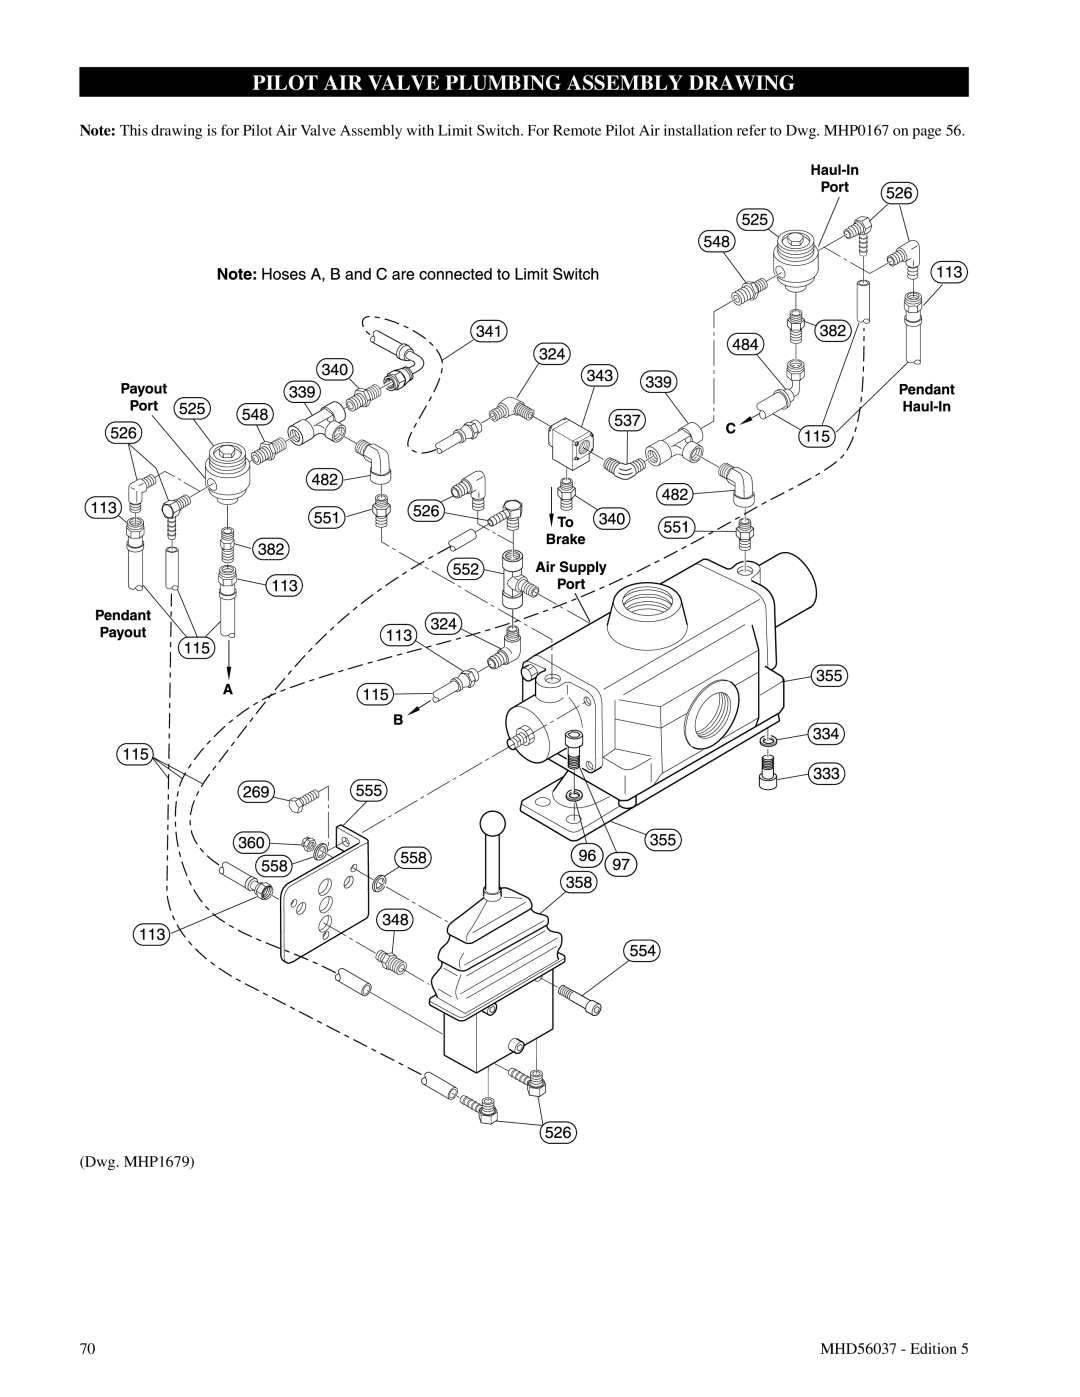 Ingersoll-Rand FA5T manual Pilot Air Valve Plumbing Assembly Drawing, Dwg. MHP1679, MHD56037 - Edition 